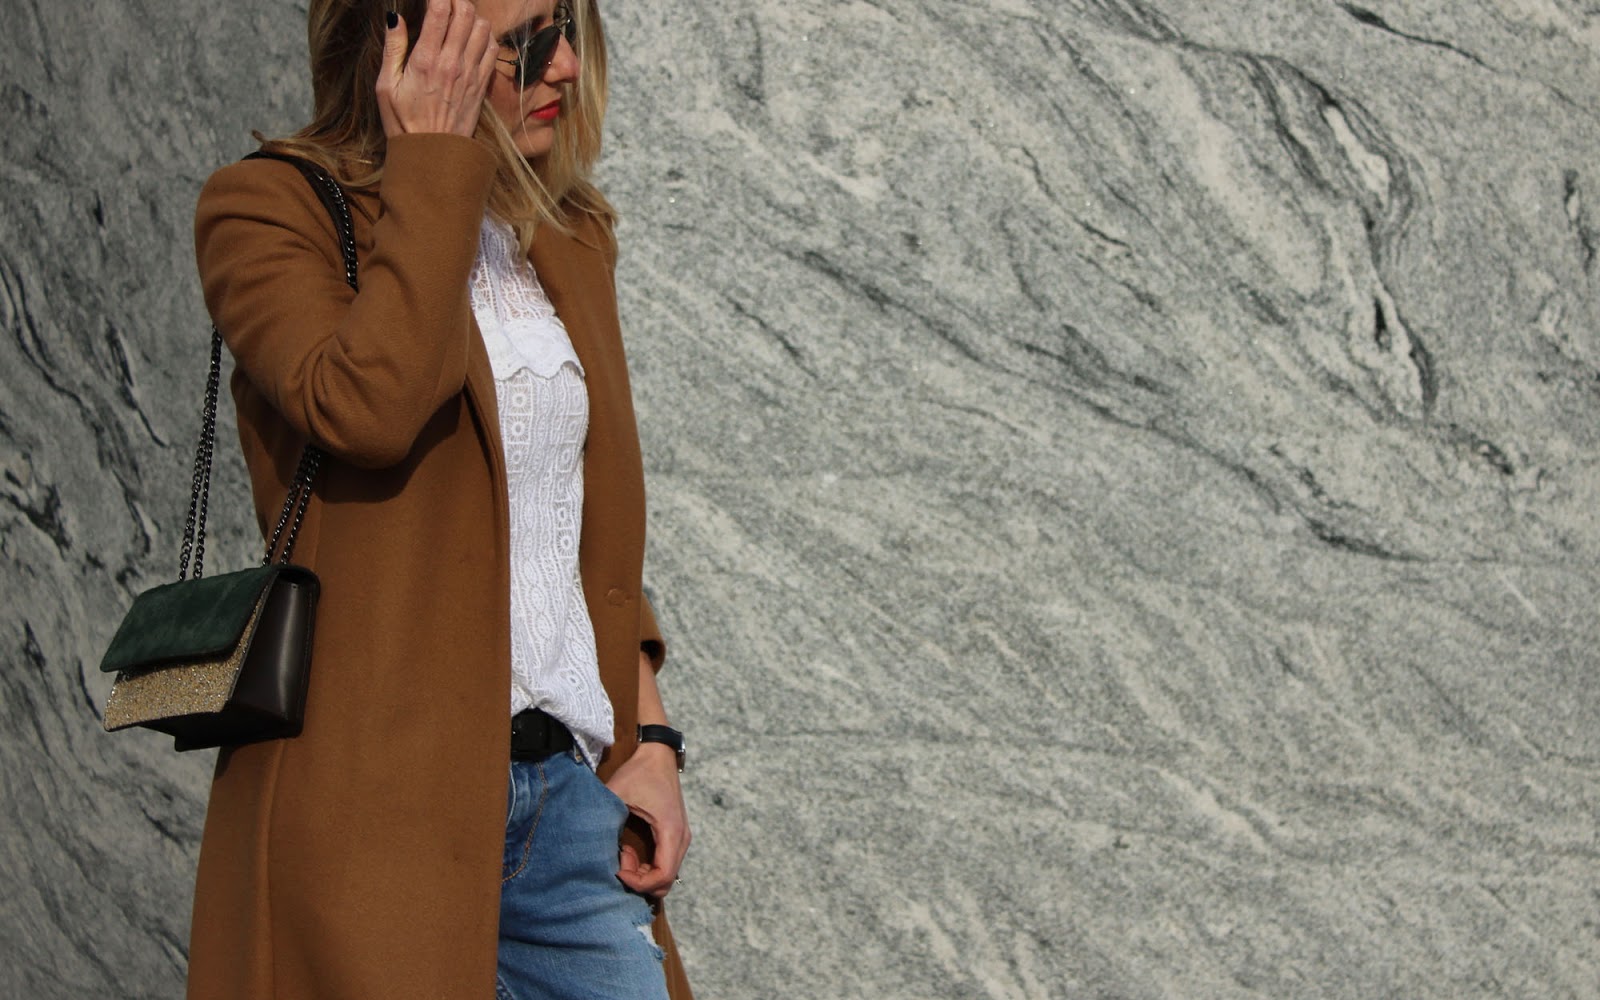 Eniwhere Fashion - Camel coat and animalier shoes